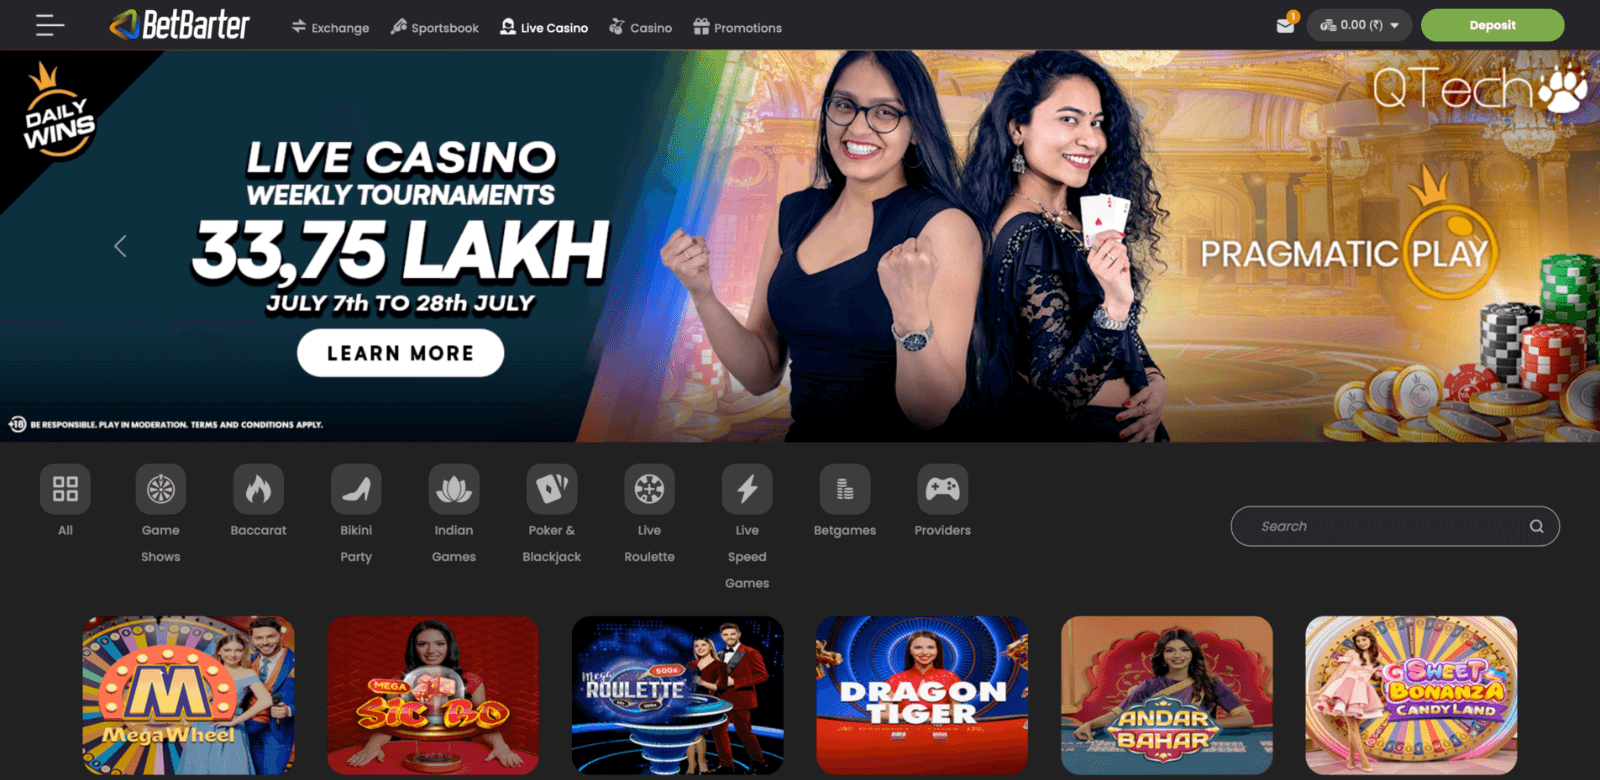 Betbarter live casino section